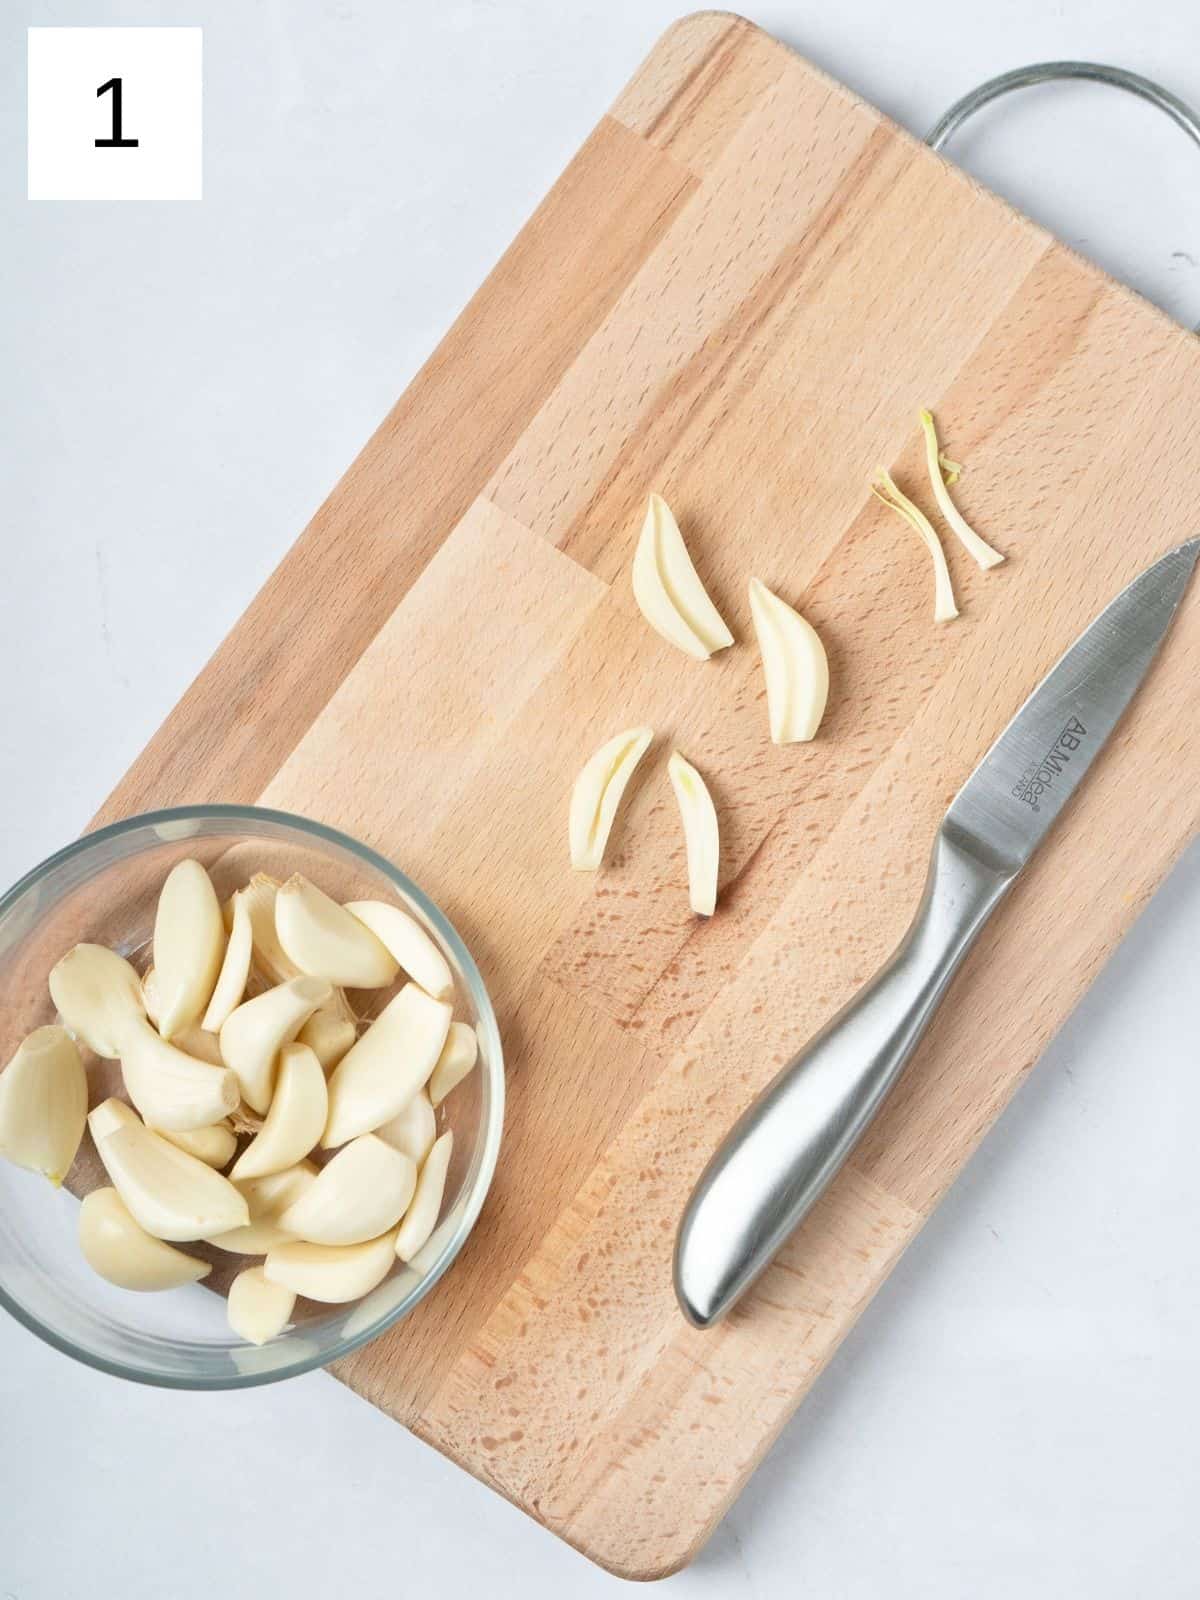 slicing the garlic cloves on a wooden chopping board.